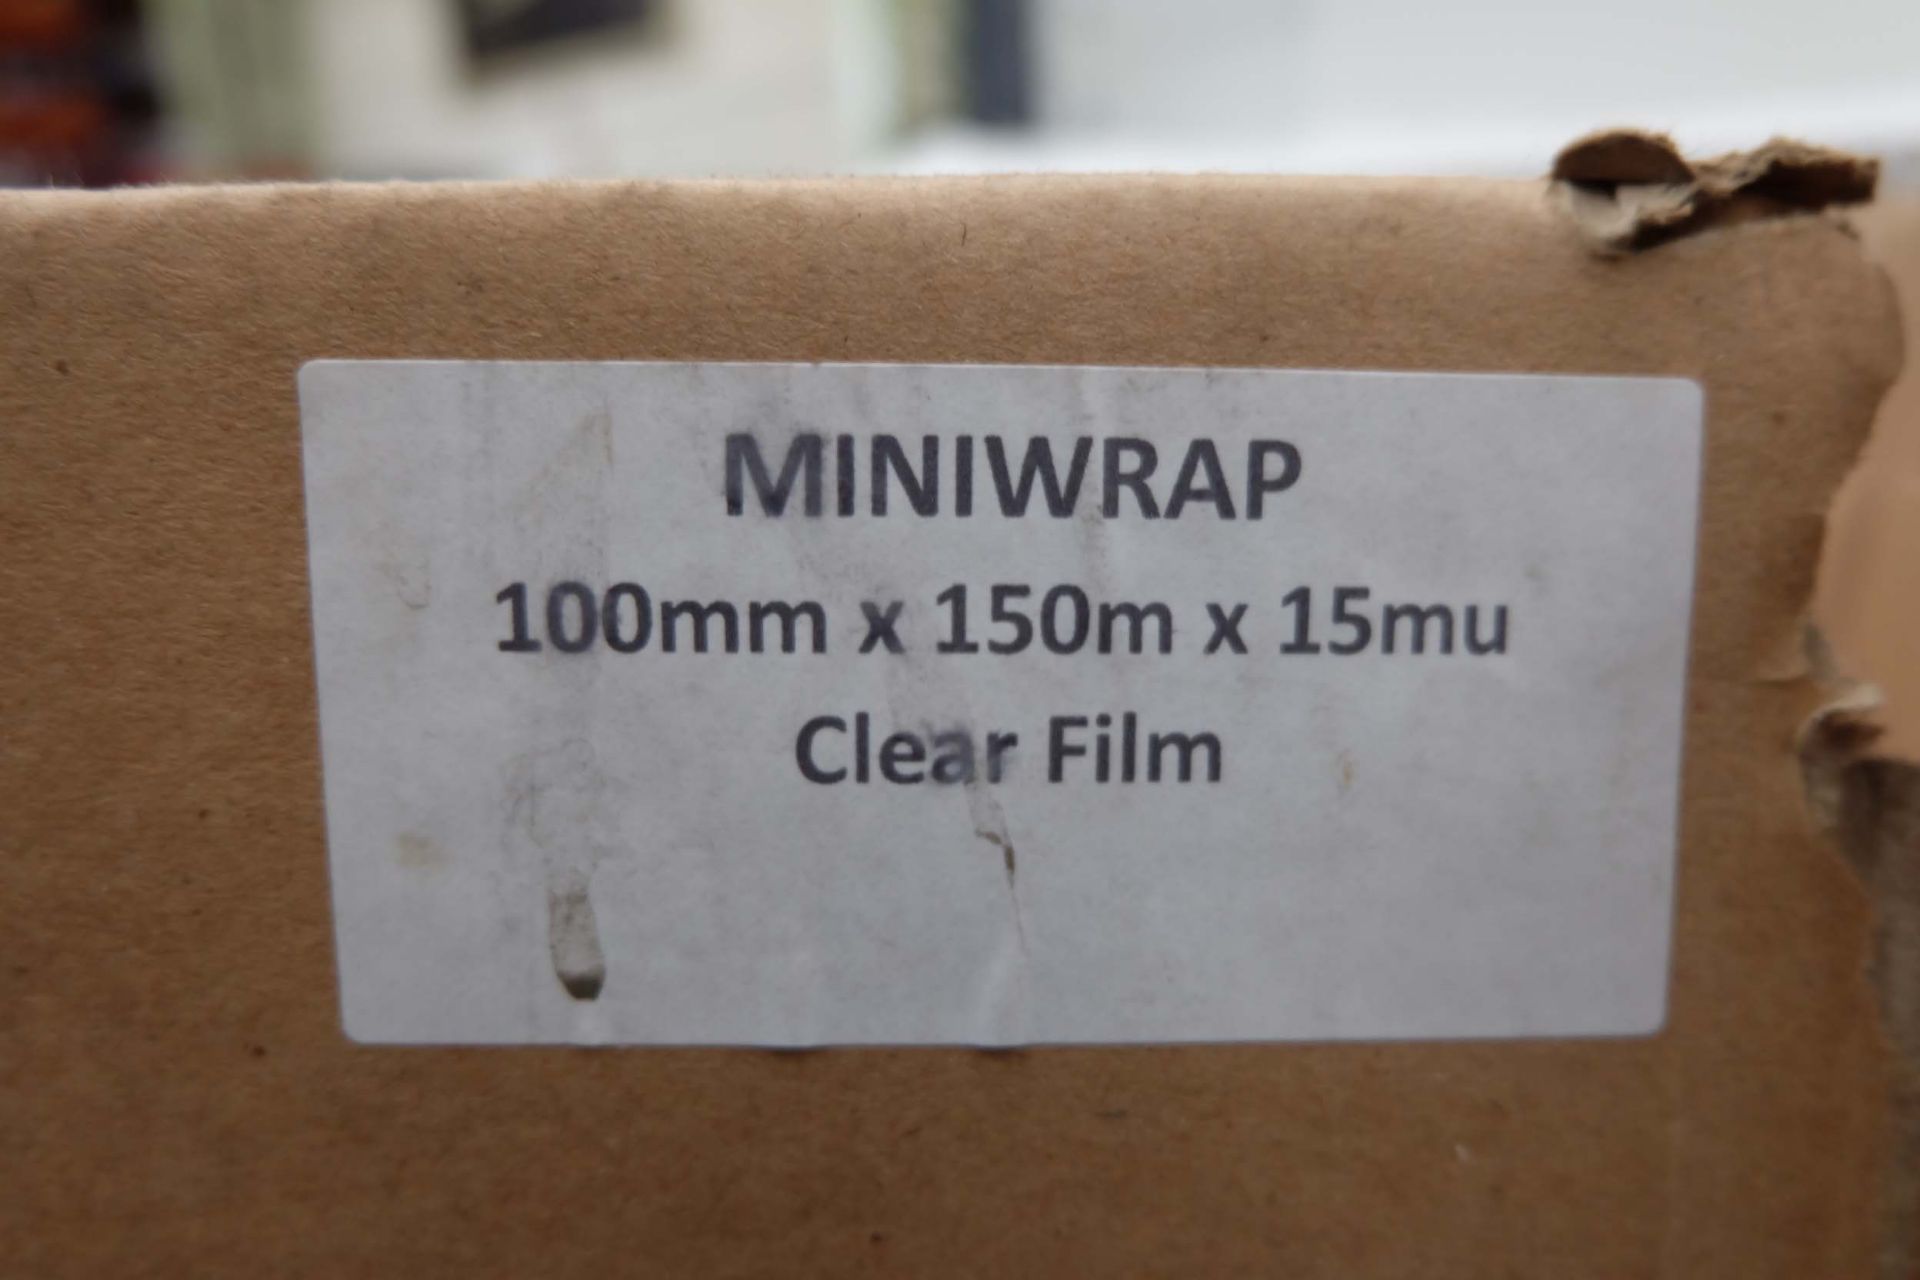 Hand Held Mini Stretch Film/Shrink Wrappers. Miniwrap and Handles. - Image 5 of 6